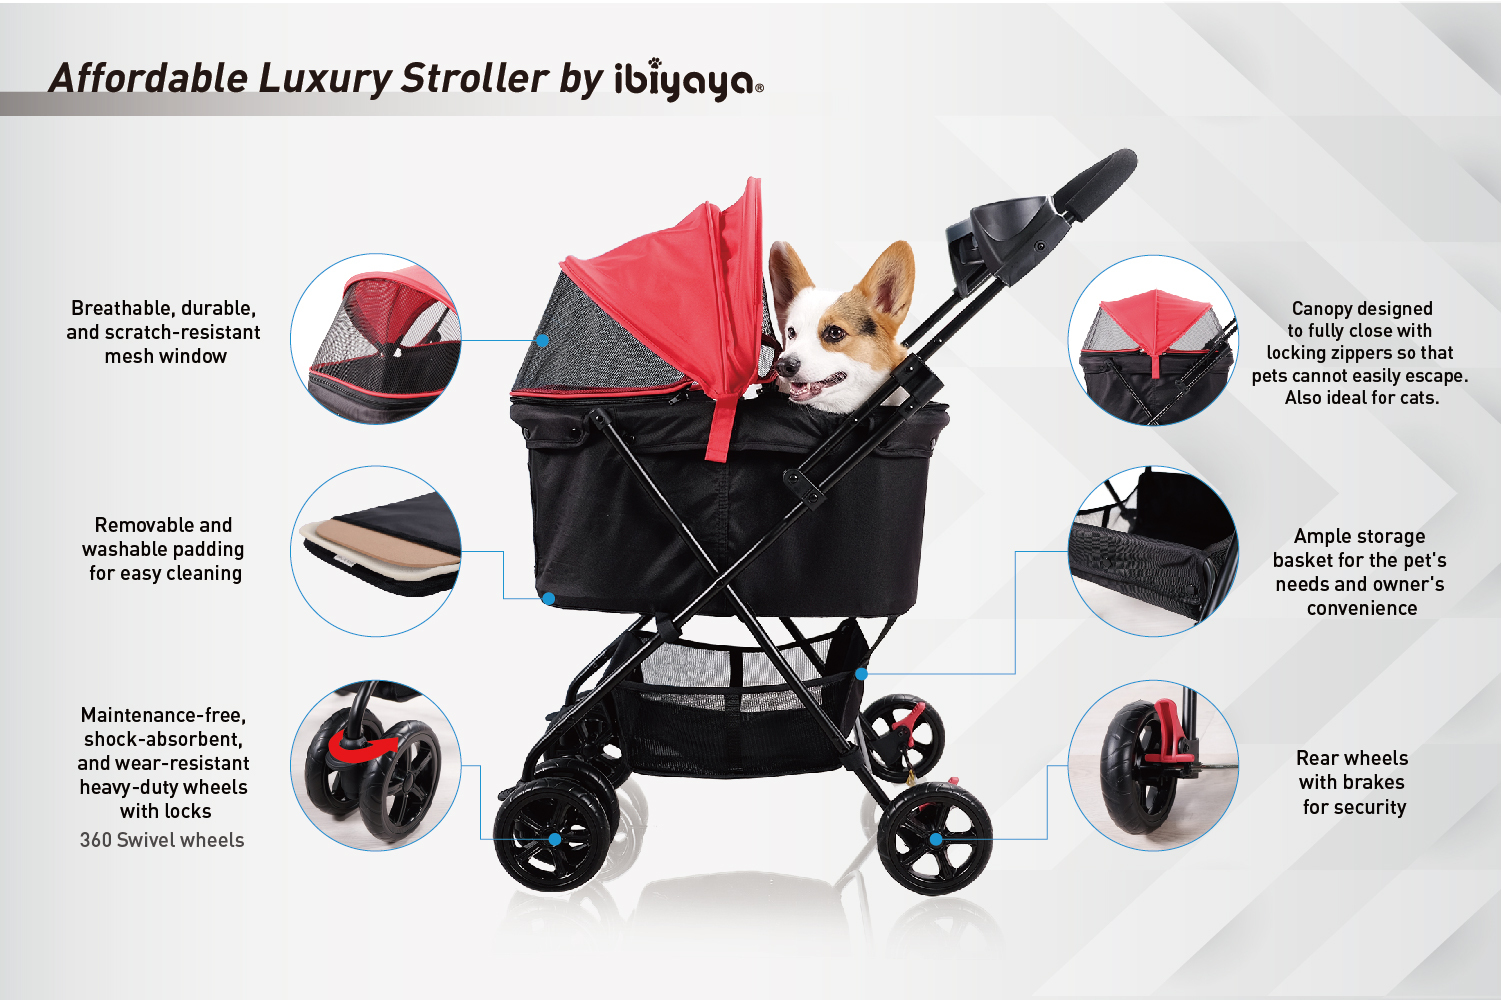 Ibiyaya Easy Strolling Pet Buggy for Cats & Dogs up to 20kg - Rouge Red image 12